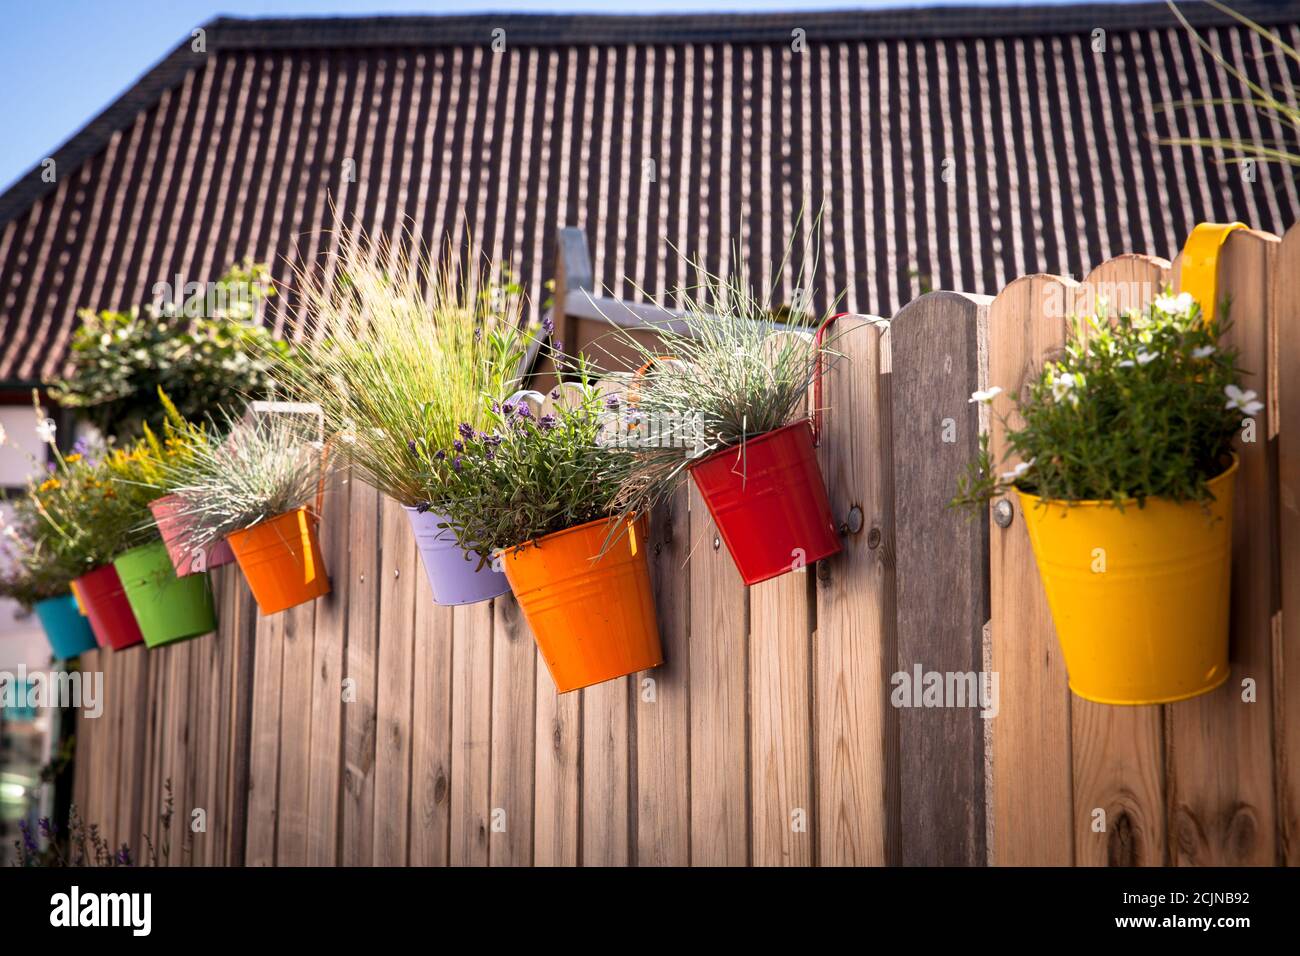 wooden fence with colorful pots with flowers and herbs in Bad Honnef-Rhoendorf on the Rhine, North Rhine-Westphalia, Germany.  Holzzaun mit bunten Toe Stock Photo